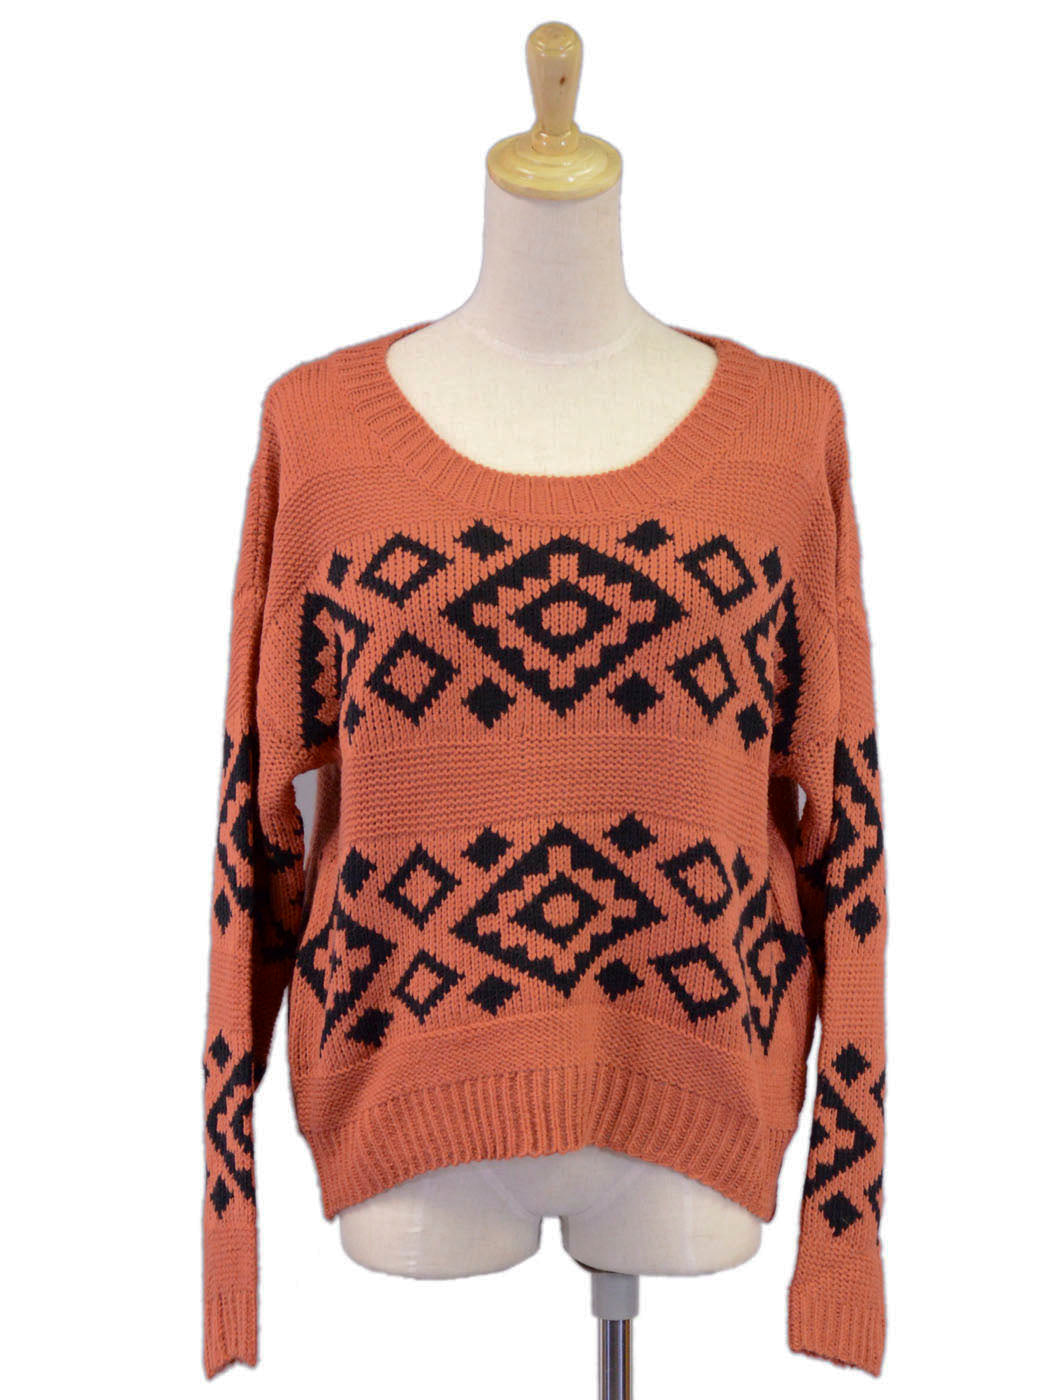 Cotton Candy Orange Cropped Scoop Neckline Diamond Long Sleeved Knitted Jumper - ALILANG.COM